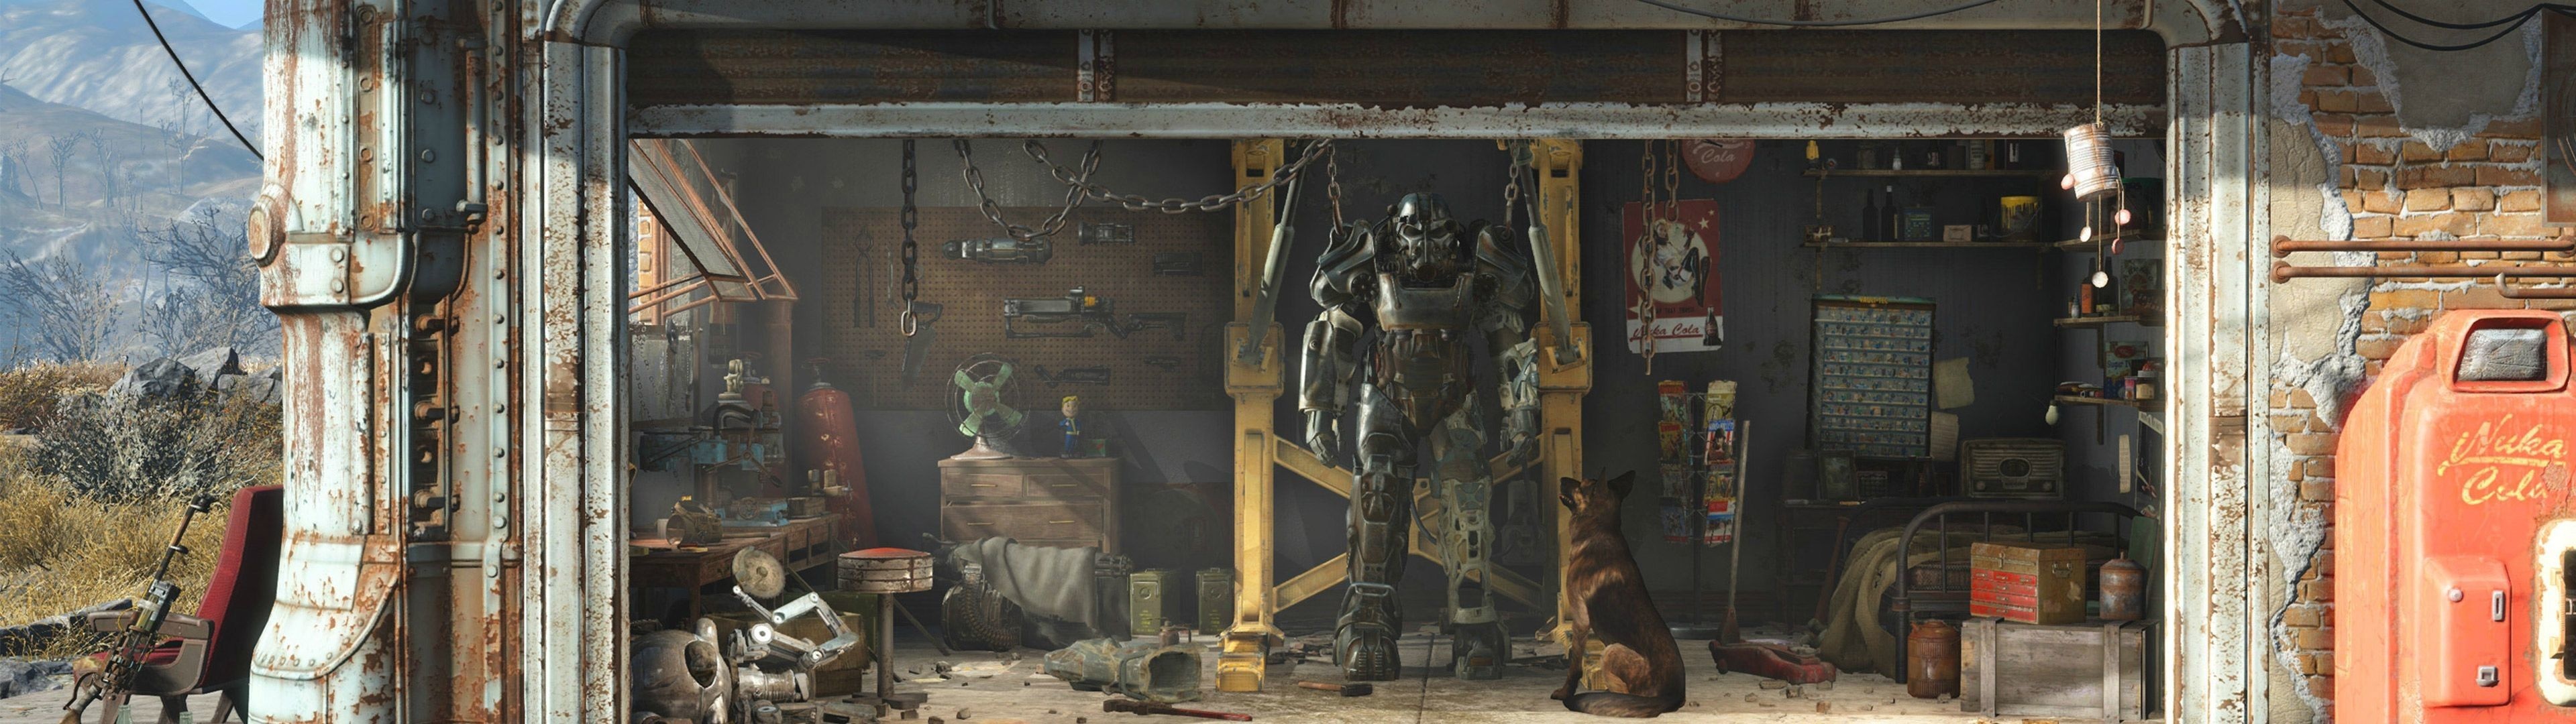 Bethesda, Fallout wallpapers, Apocalyptic scenery, Gaming backgrounds, 3840x1080 Dual Screen Desktop